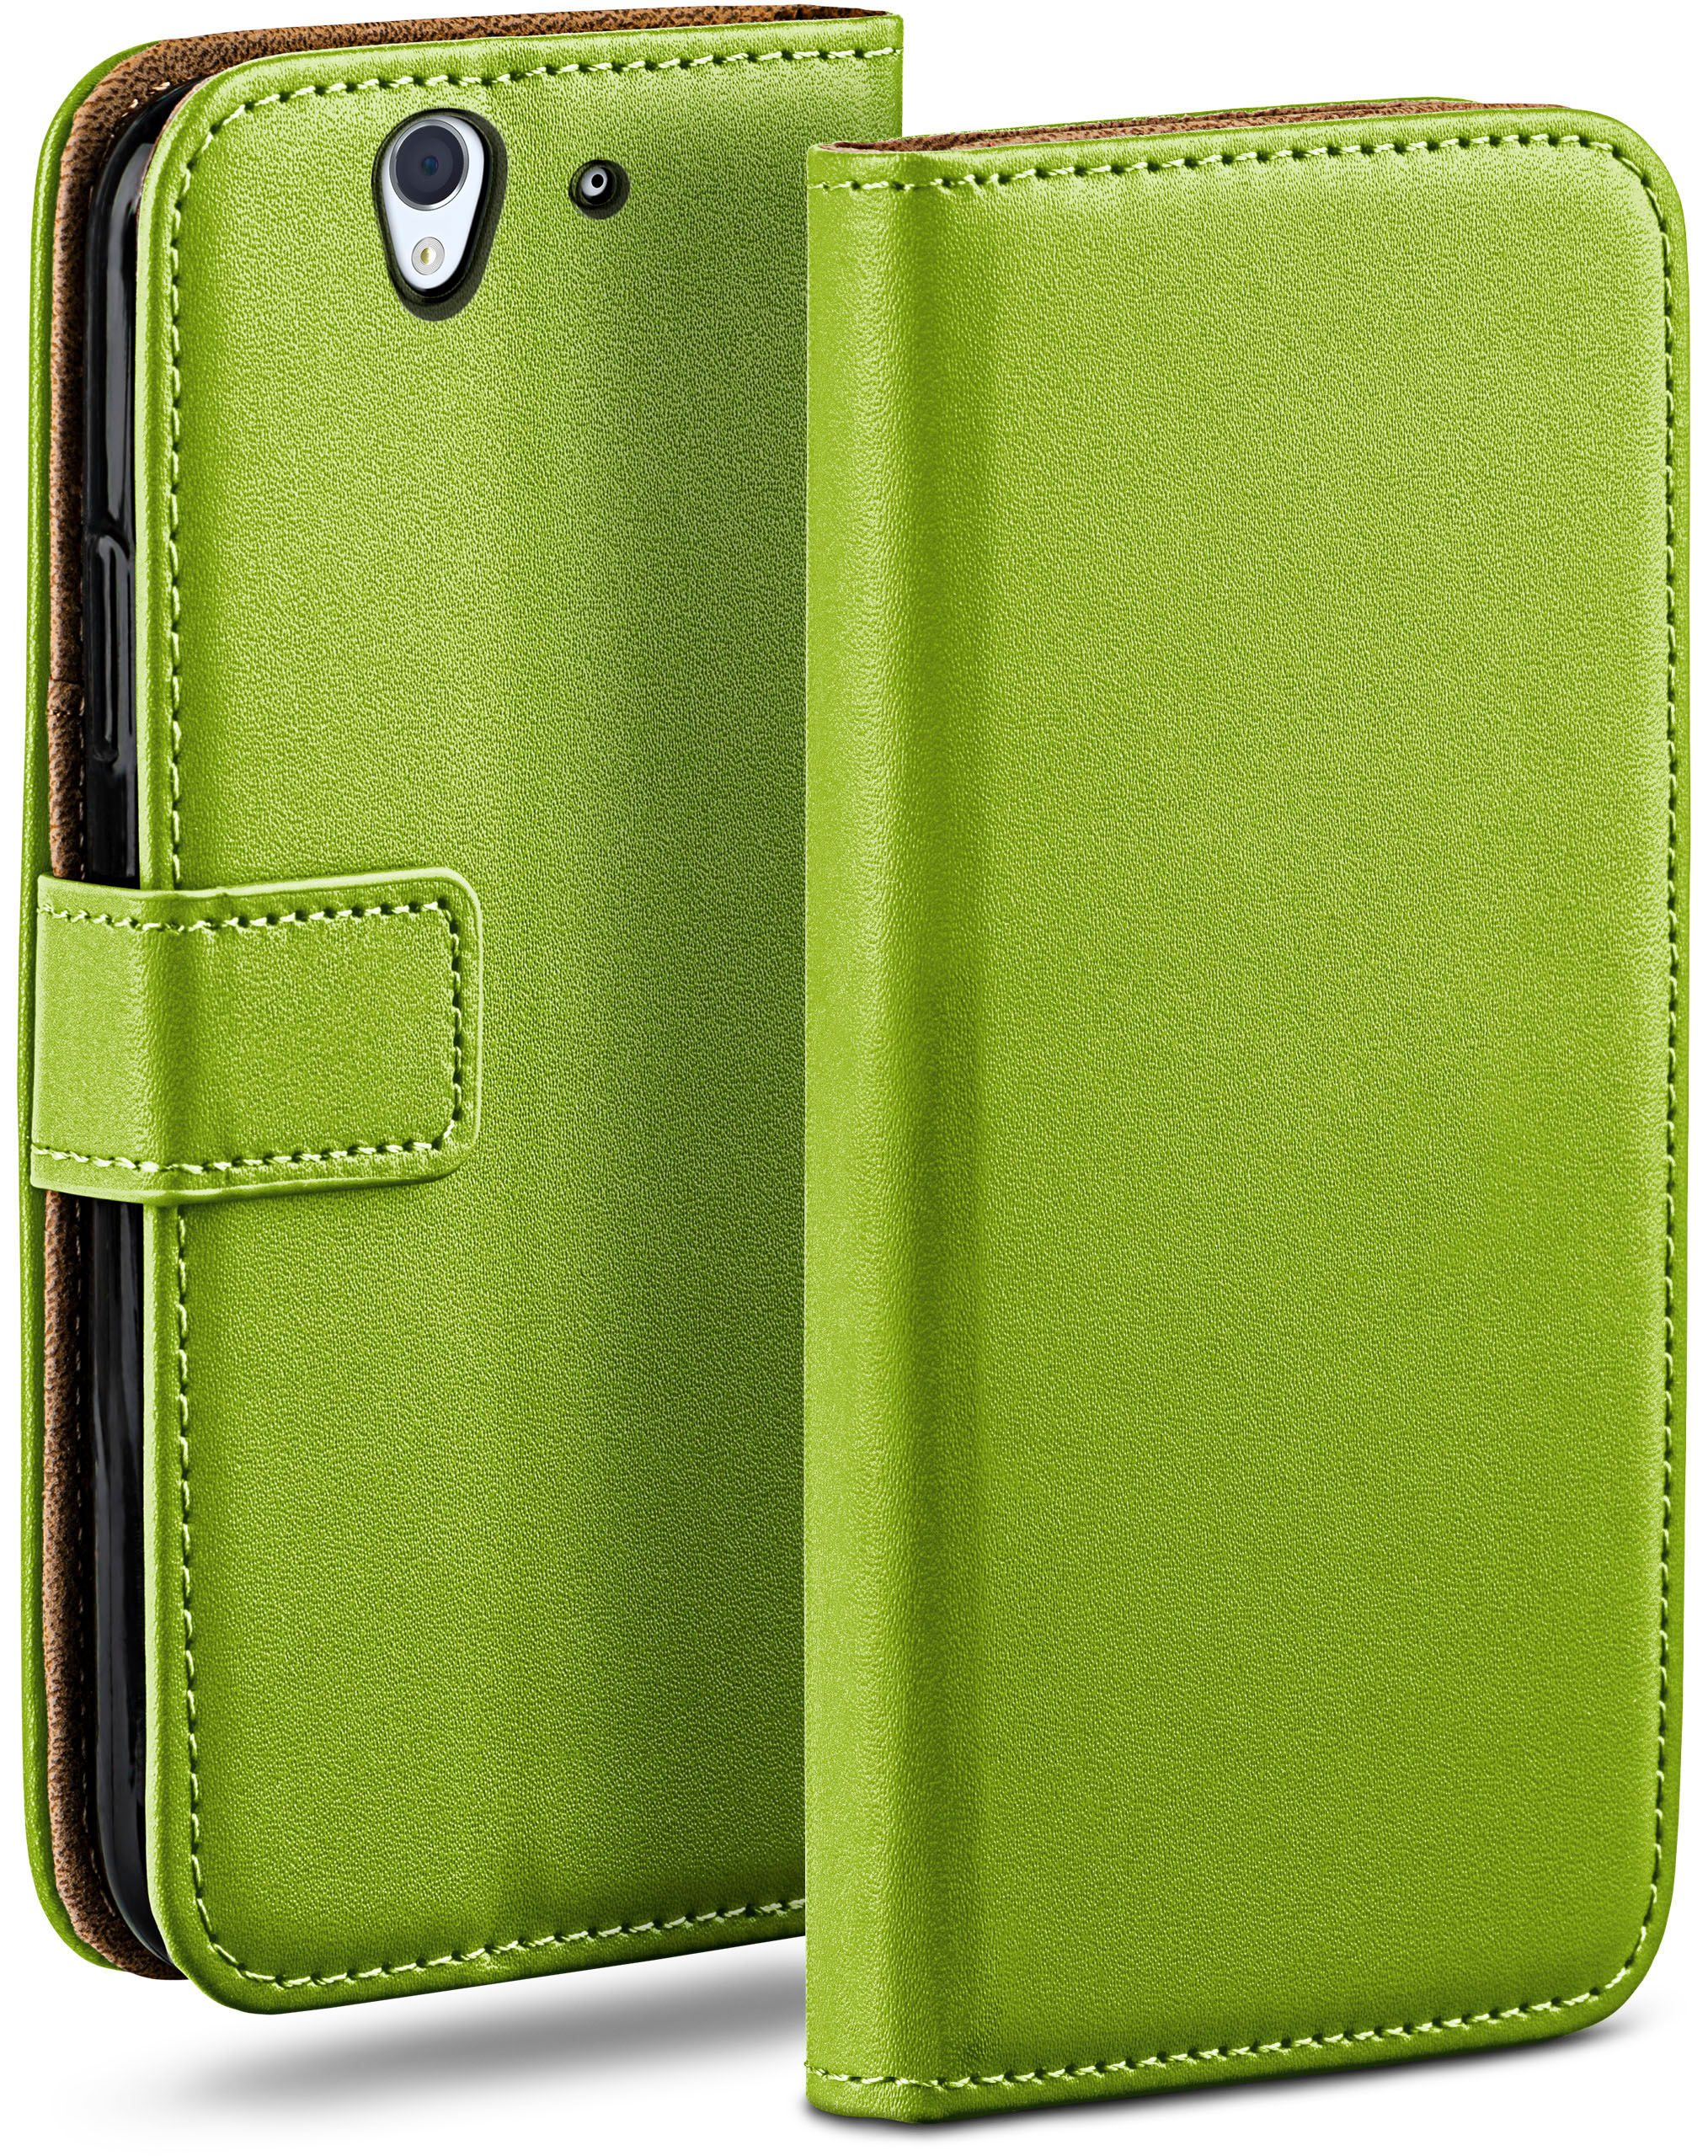 Xperia Case, Book MOEX Sony, Lime-Green Z, Bookcover,